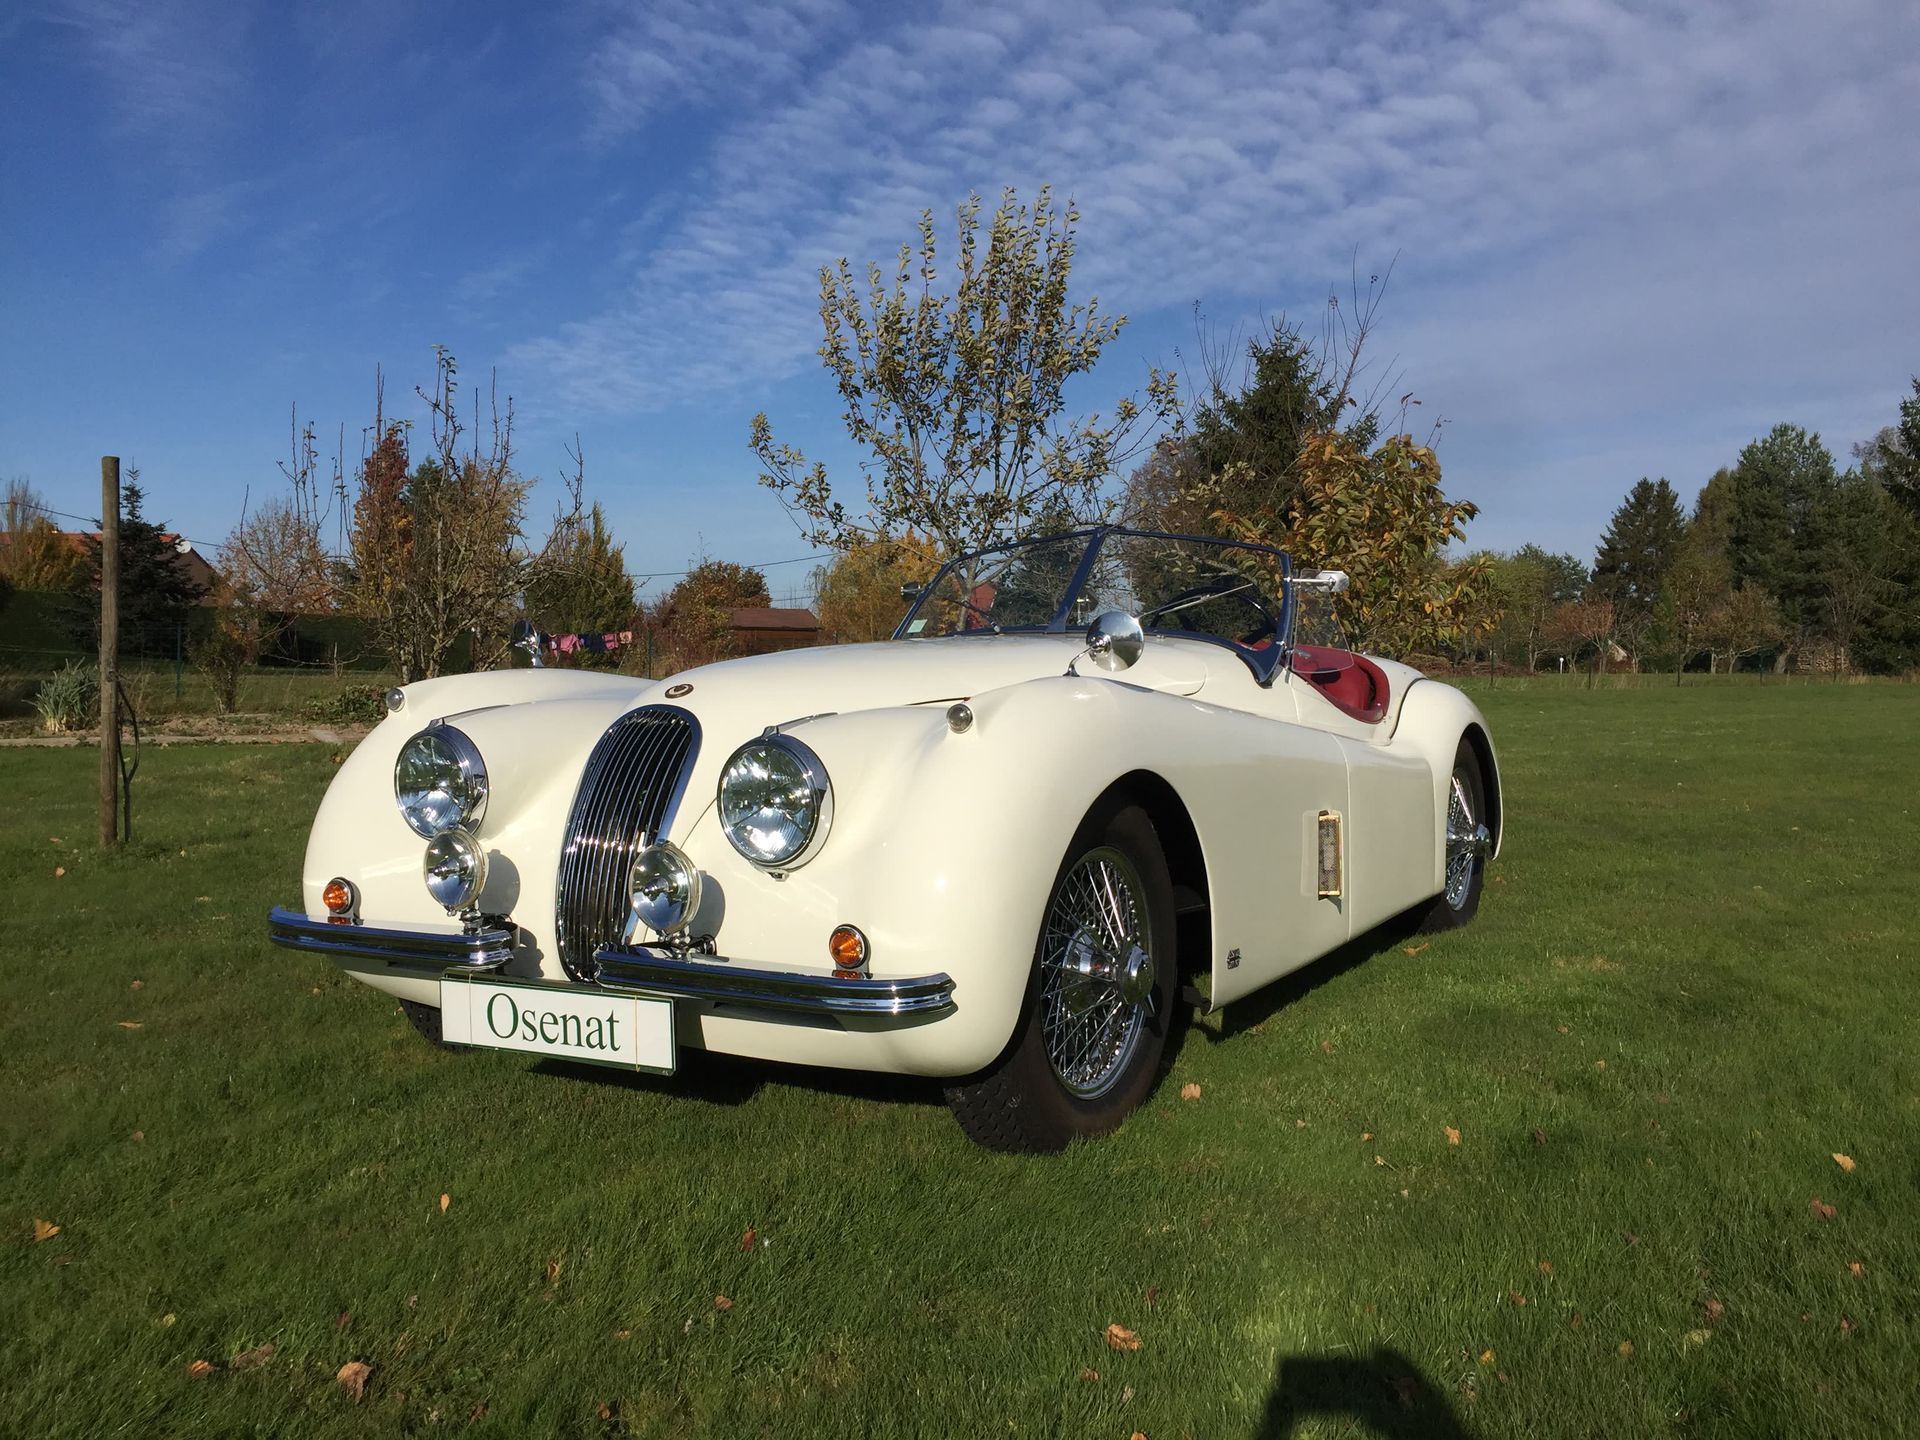 1954 JAGUAR XK 120 ROADSTER Serial number: 675009

Superb condition

French coll&hellip;